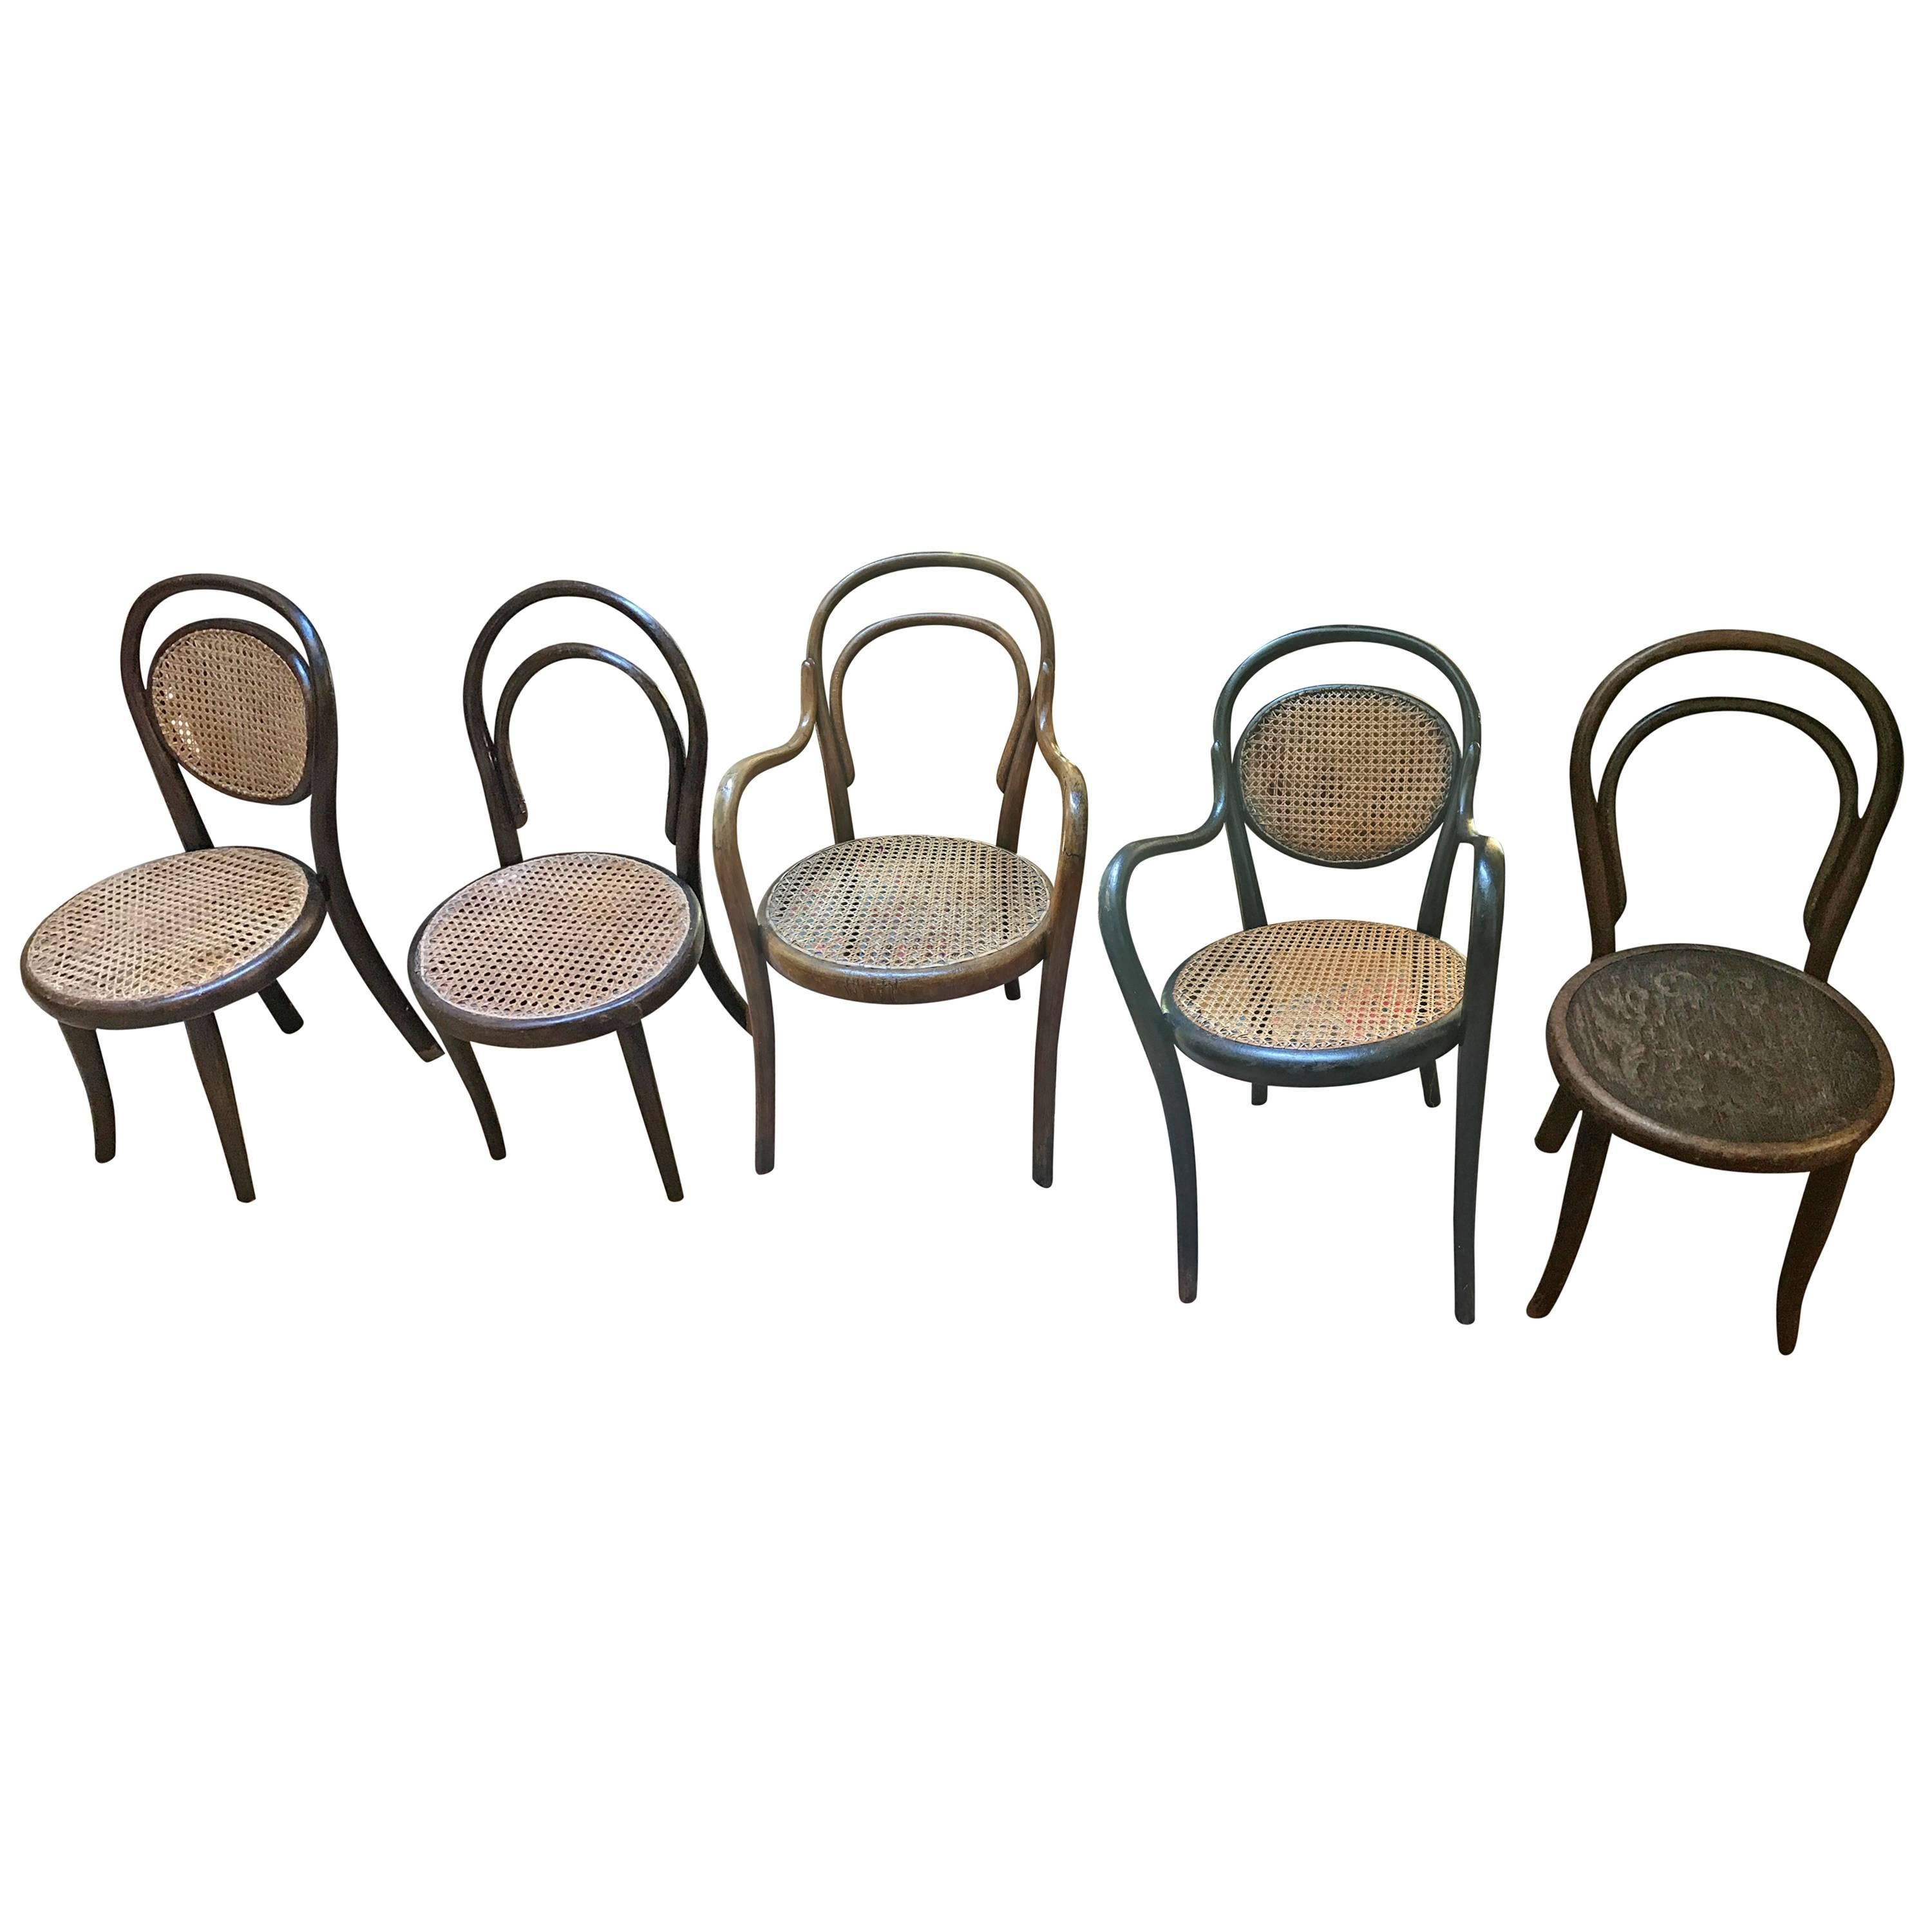 Thonet  bentwood Collection of Five   different Children’s Chairs, 1900 child For Sale